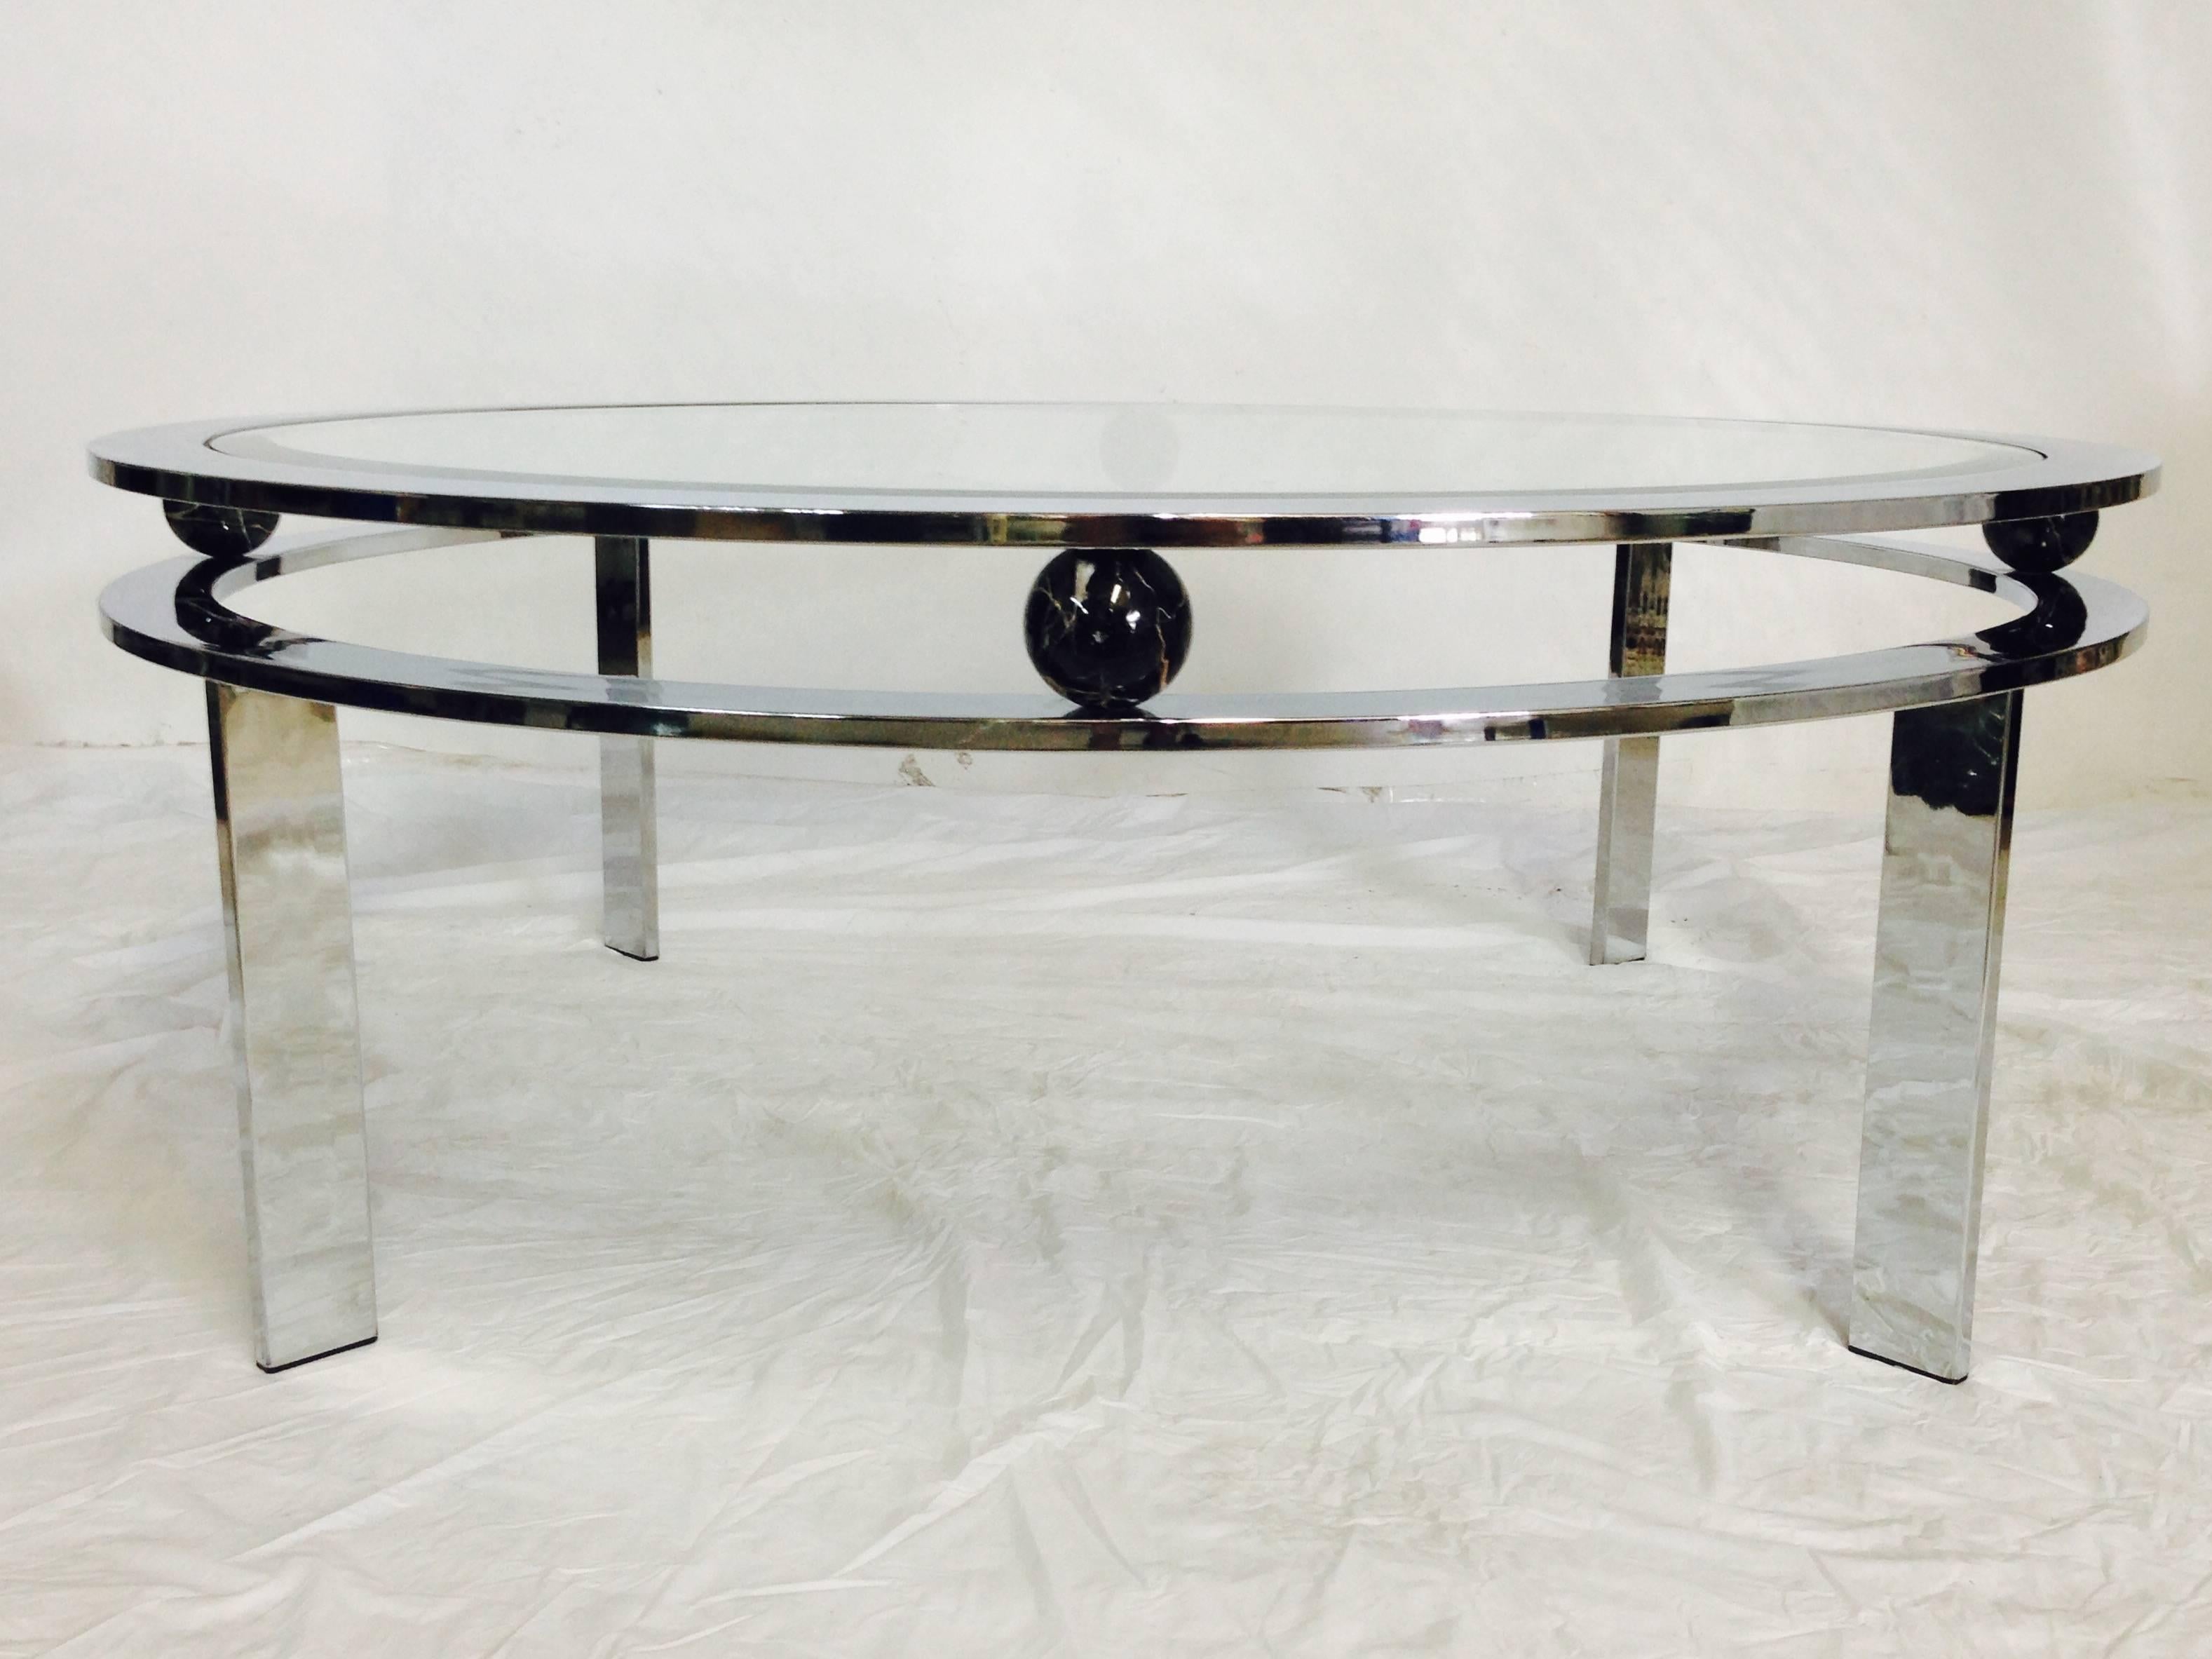 Design Institute of America round chrome coffee table with glass top. Decorated with two round black with white veined marble balls. Signed and numbered "D.I.A. 133966" on the underside. Original metal manufacture's label intact.